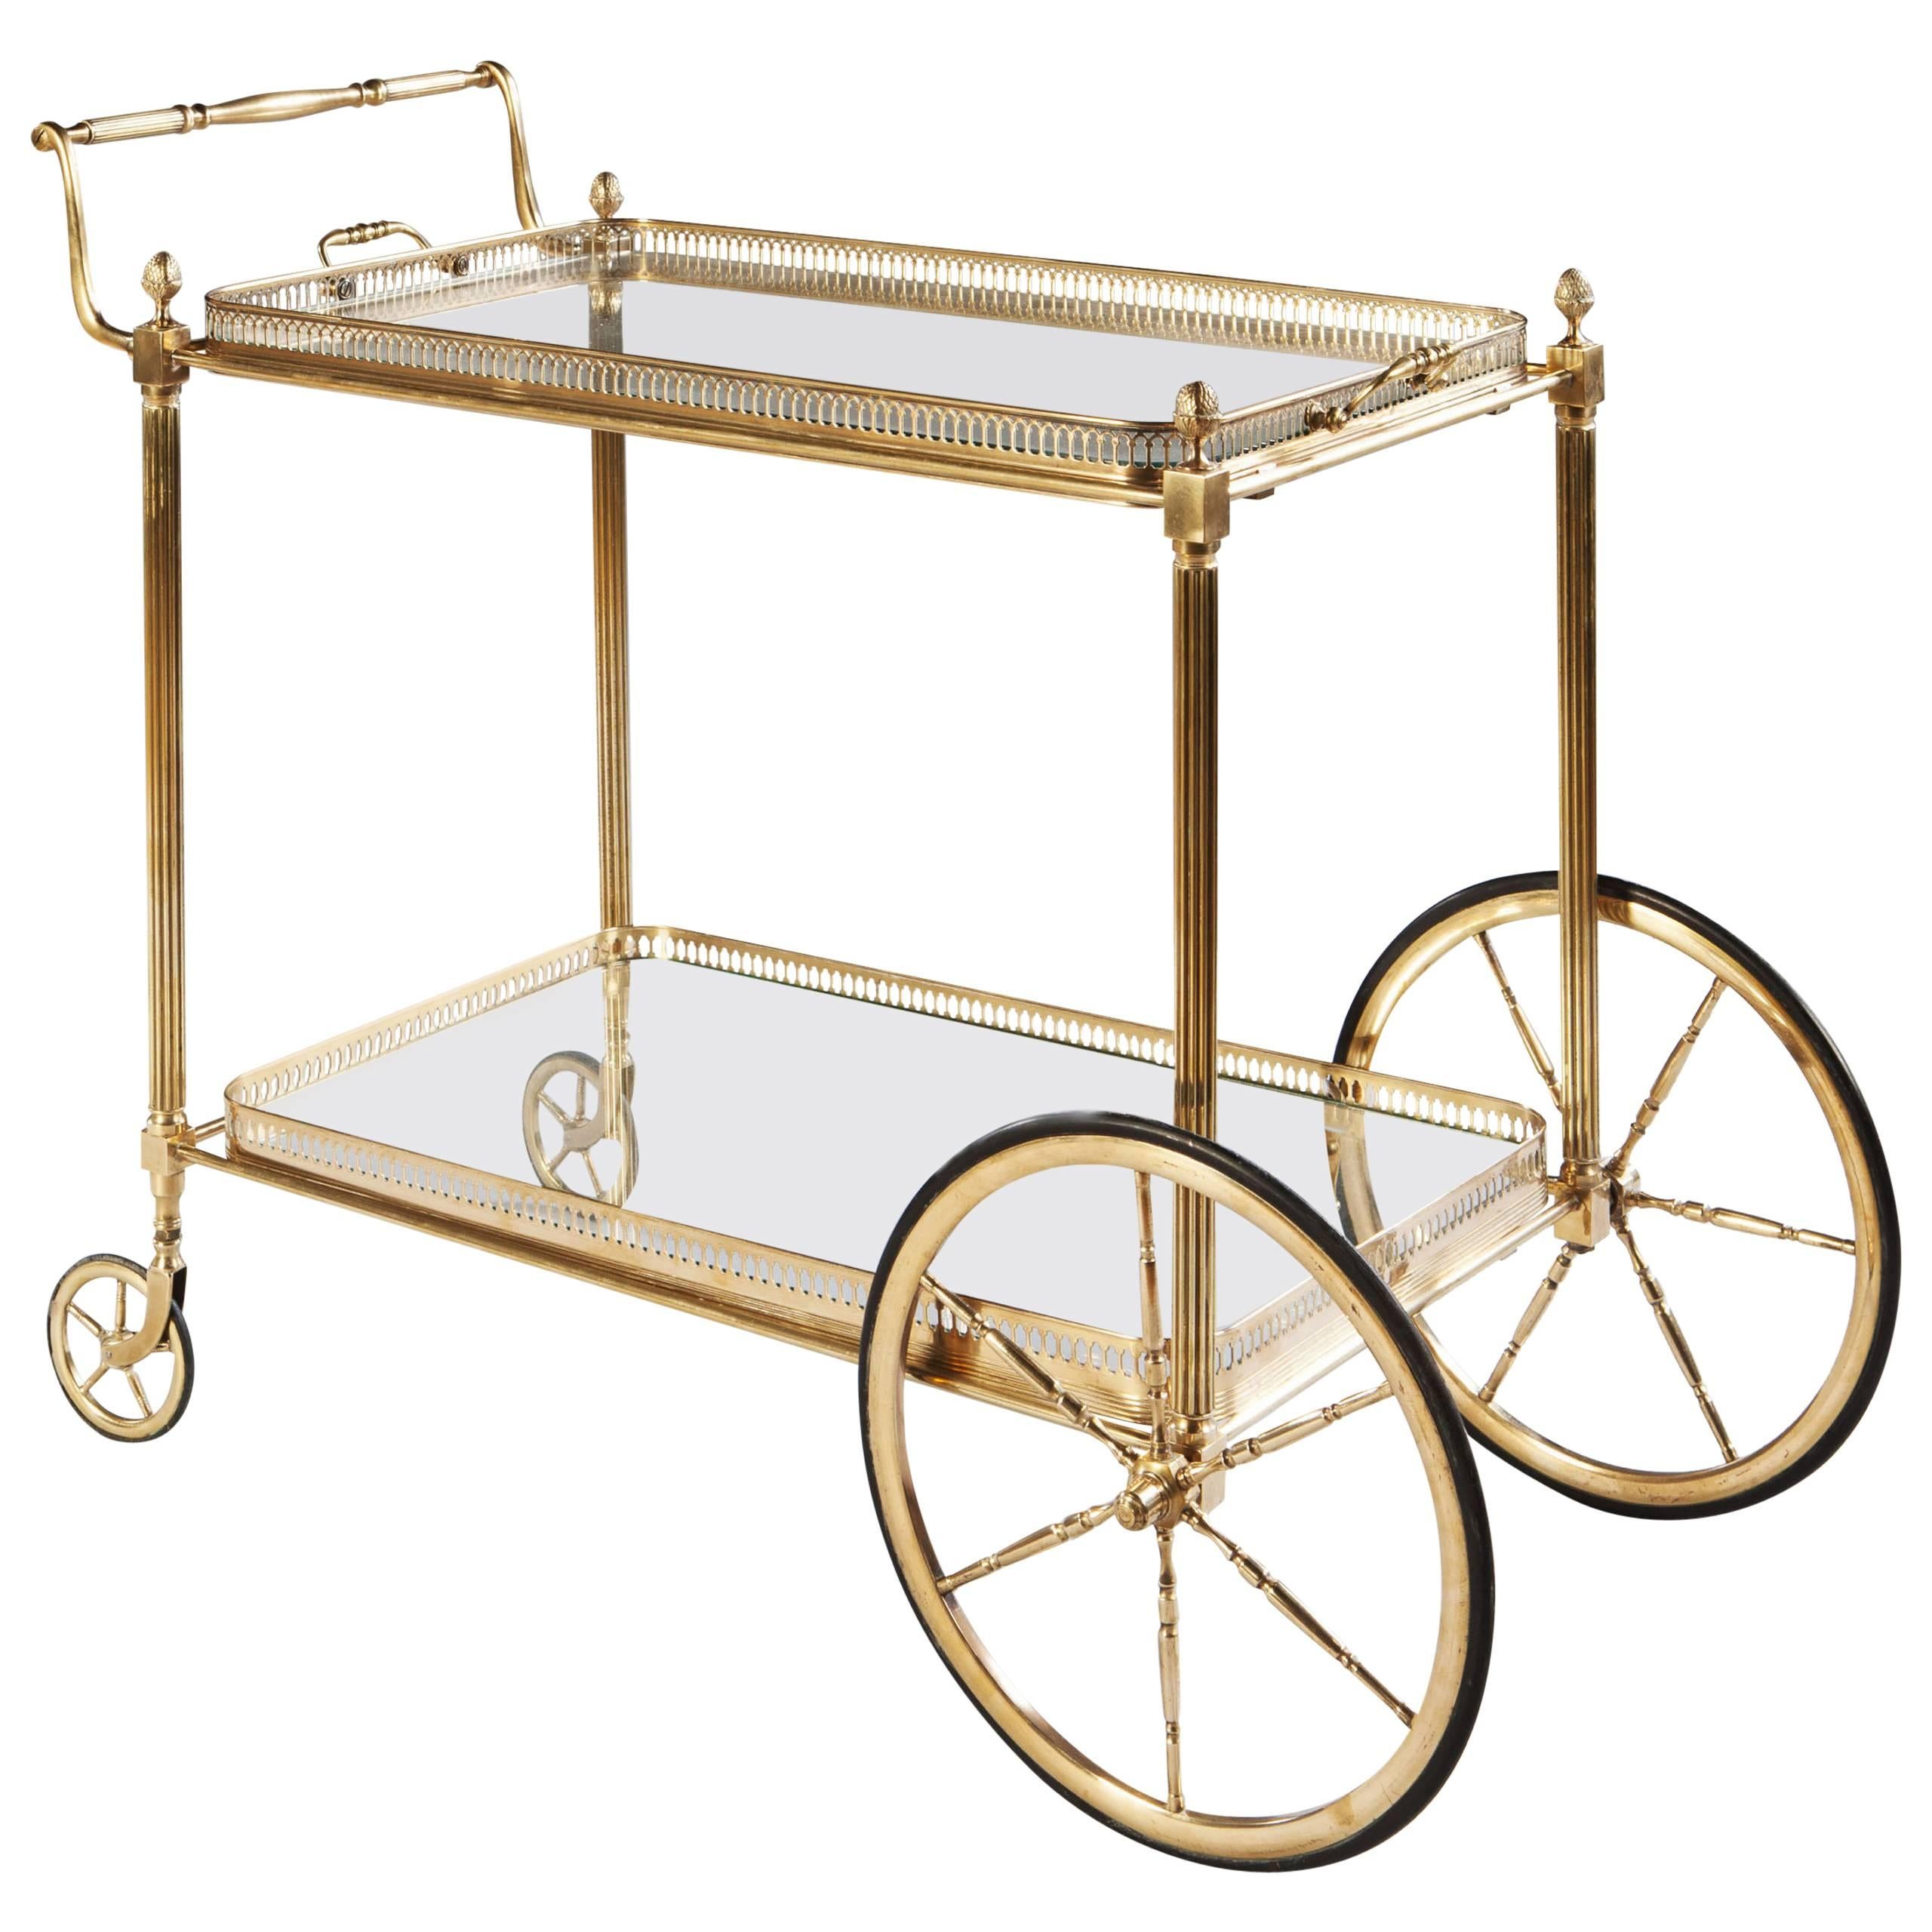 Maison Jansen Polished Brass and Glass Bar Cart or Cocktail Table